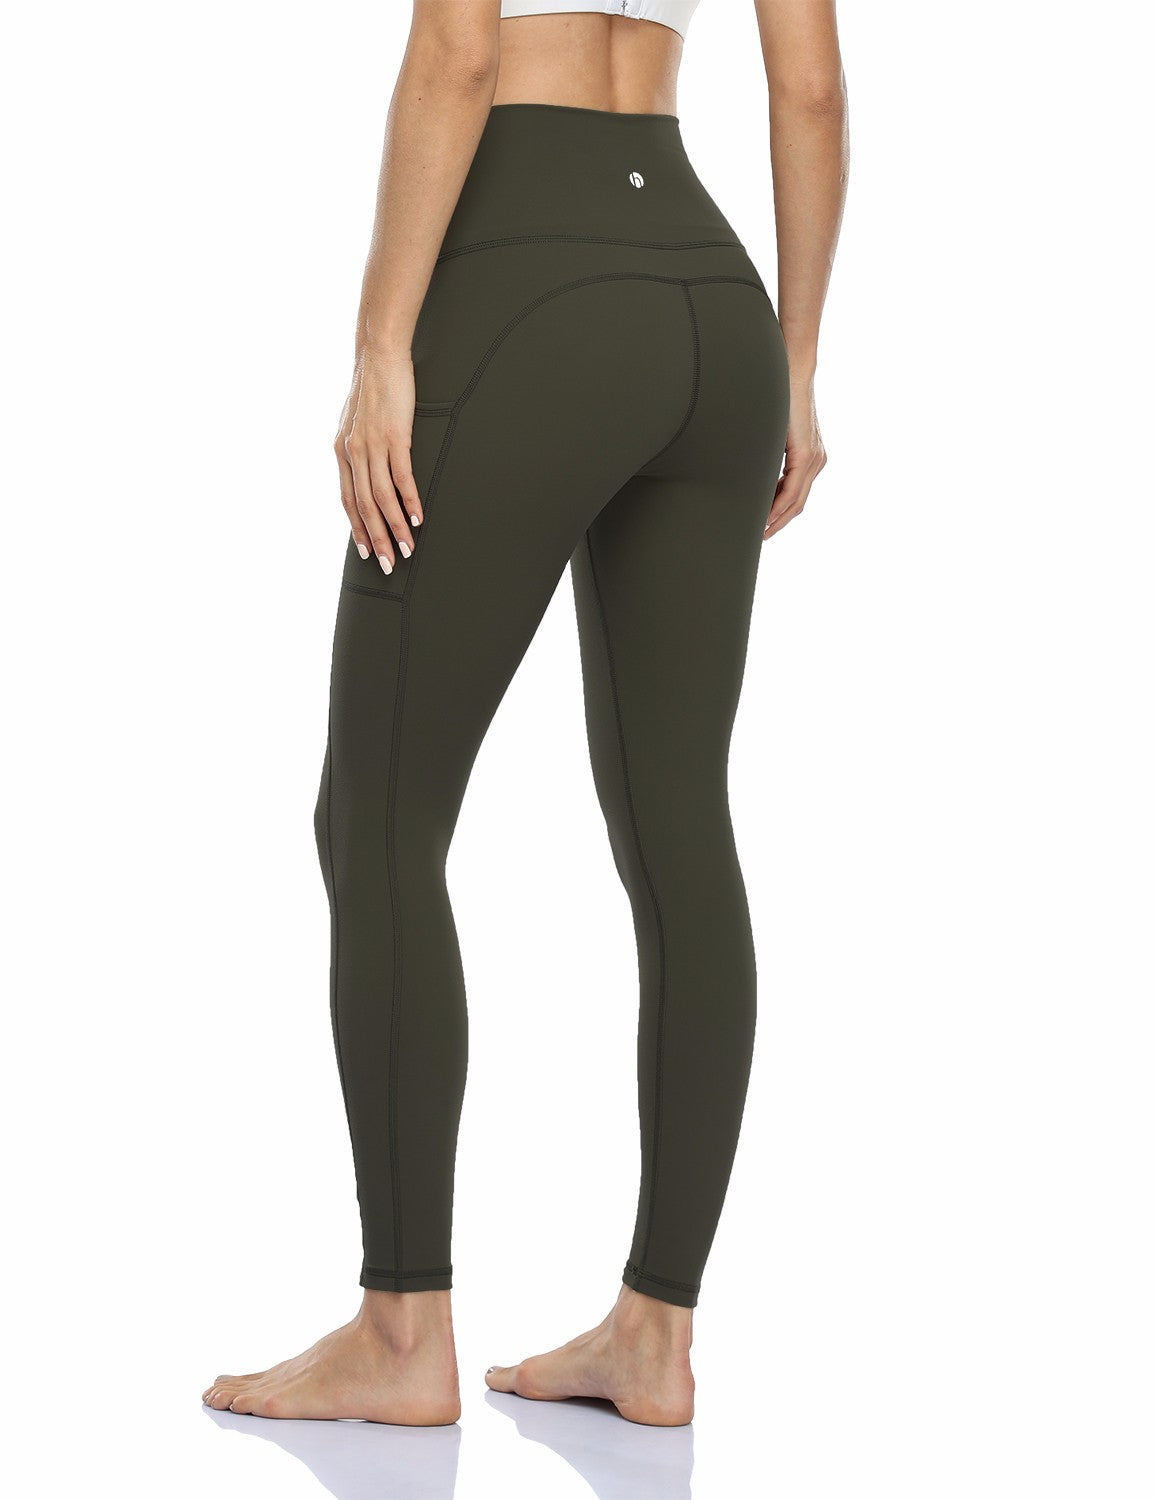 HeyNuts Essential 7/8 Leggings High Waisted Yoga Pants for Women, Soft  Workout Pants Compression Leggings with Inner Pockets Graphite Grey_25''  XL(14) : Buy Online at Best Price in KSA - Souq is